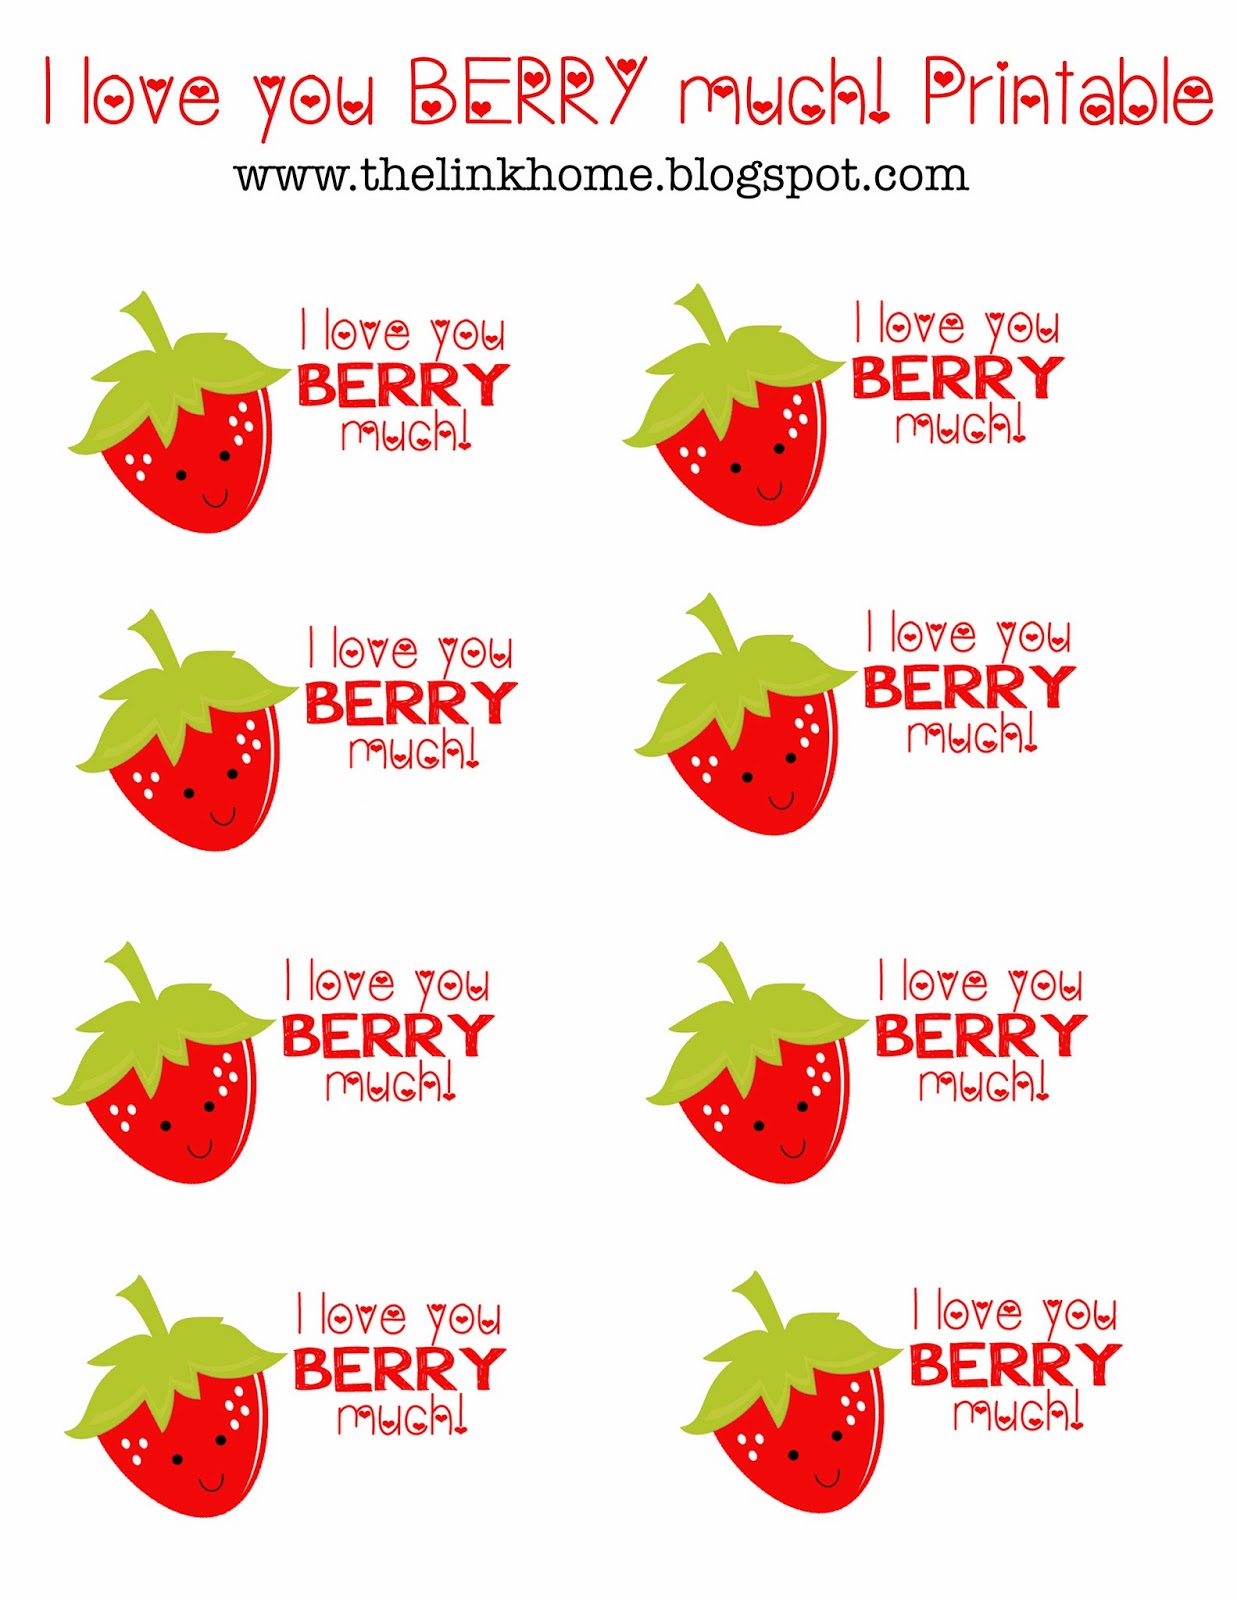 I Love You Berry Much Printable Free